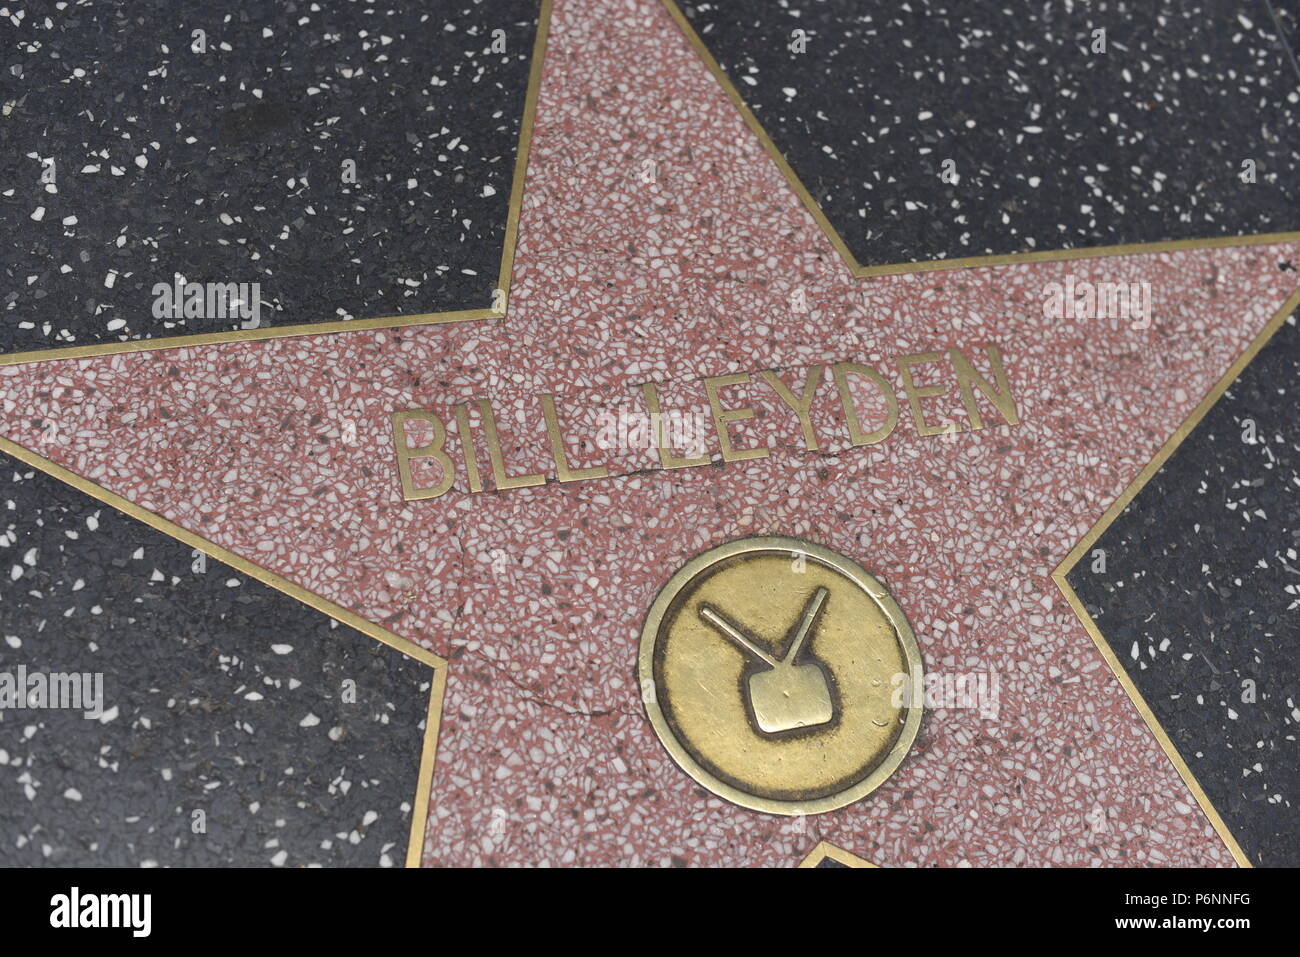 HOLLYWOOD, CA - June 29: Bill Leyden star on the Hollywood Walk of Fame in Hollywood, California on June 29, 2018. Stock Photo